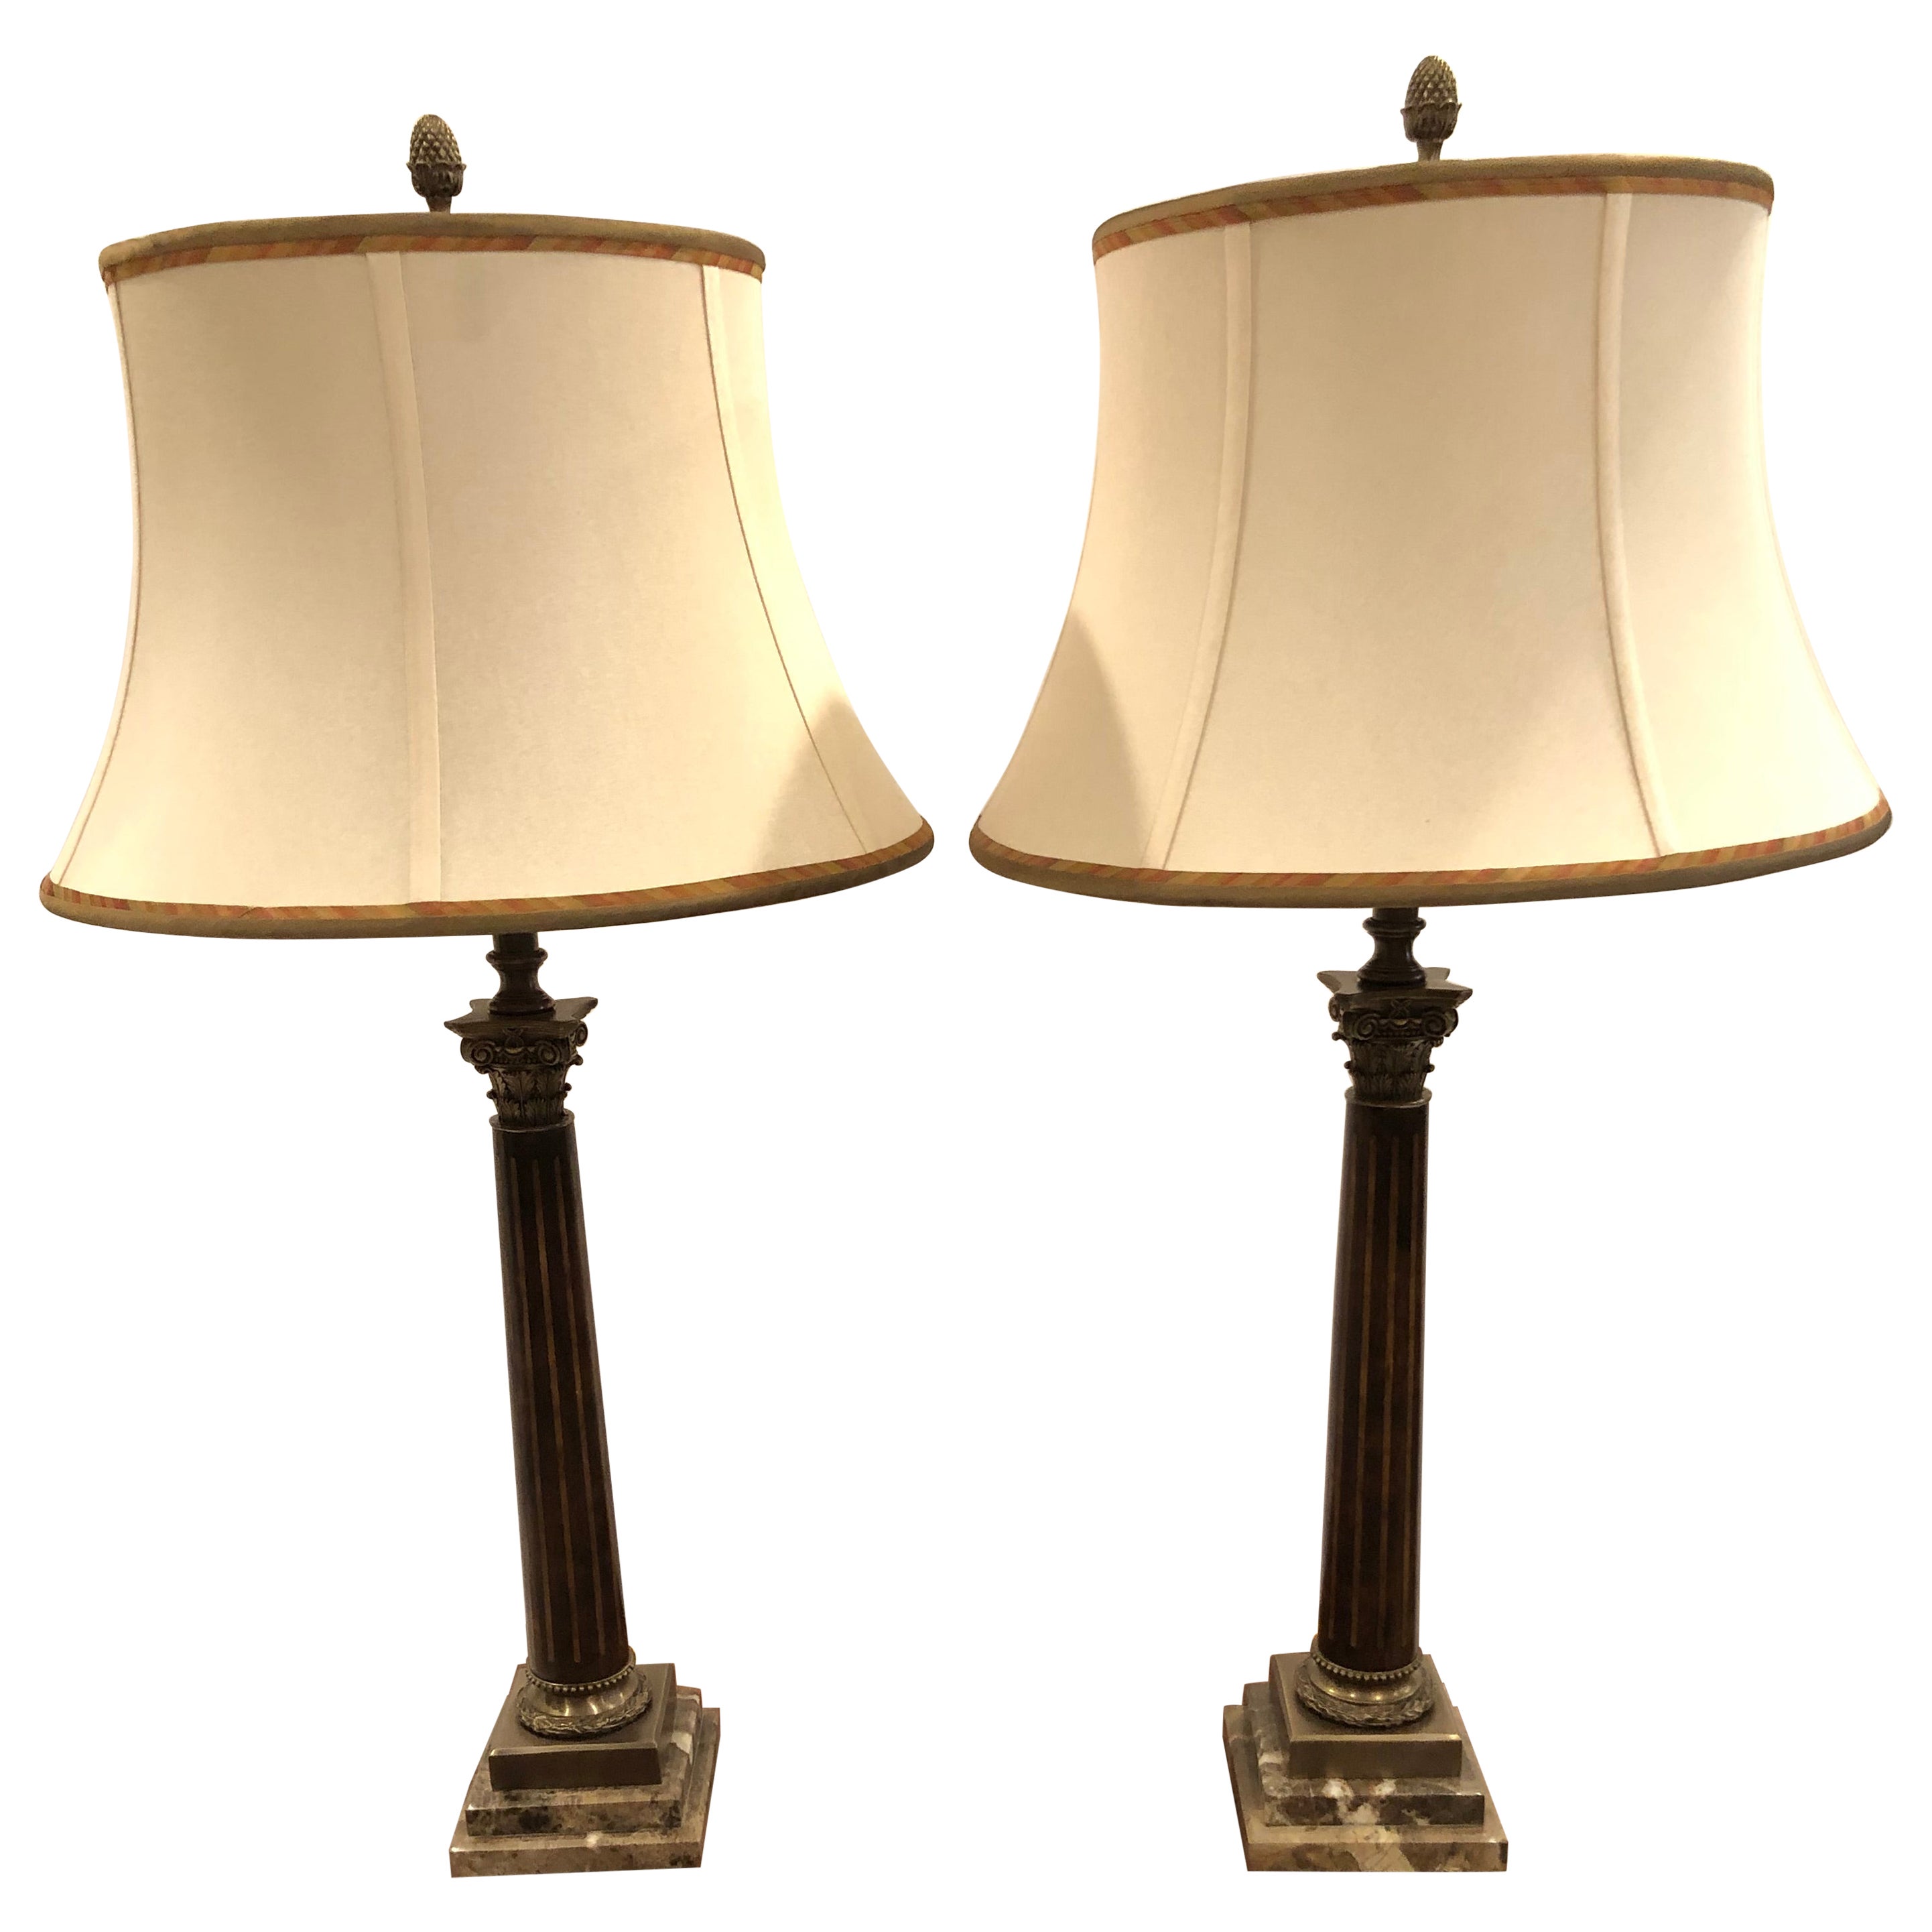 Handsome Pair of Theodore Alexander Burlwood Inlaid Column Table Lamps For Sale